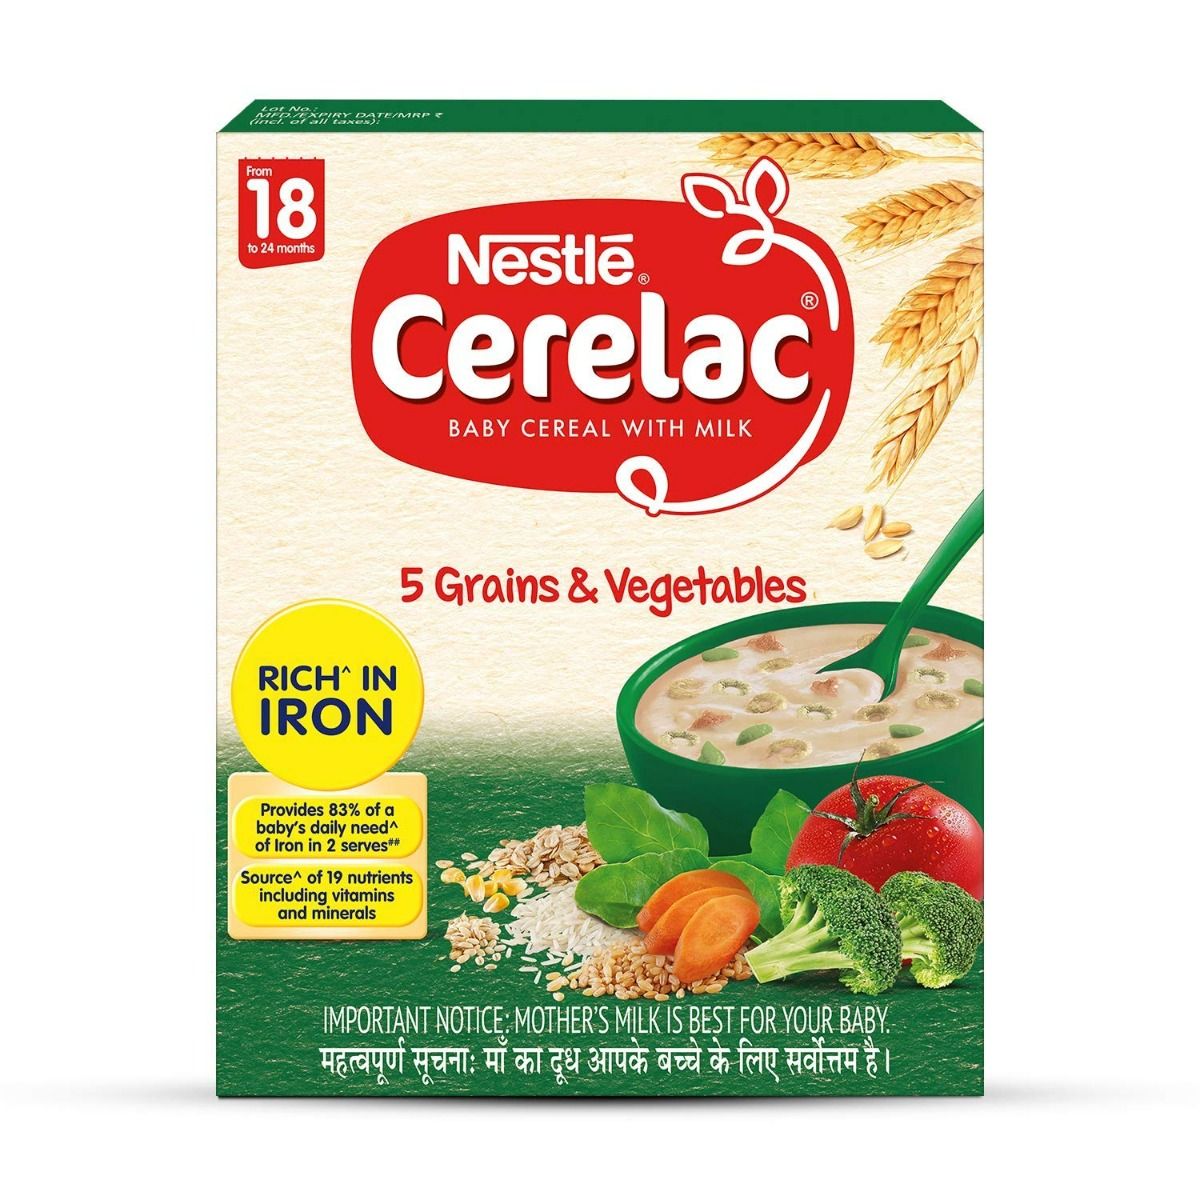 Buy Nestle Cerelac Baby Cereal with Milk, 5 Grains &  Vegetables, 18 to 24 Months, 300 gm Refill Pack Online